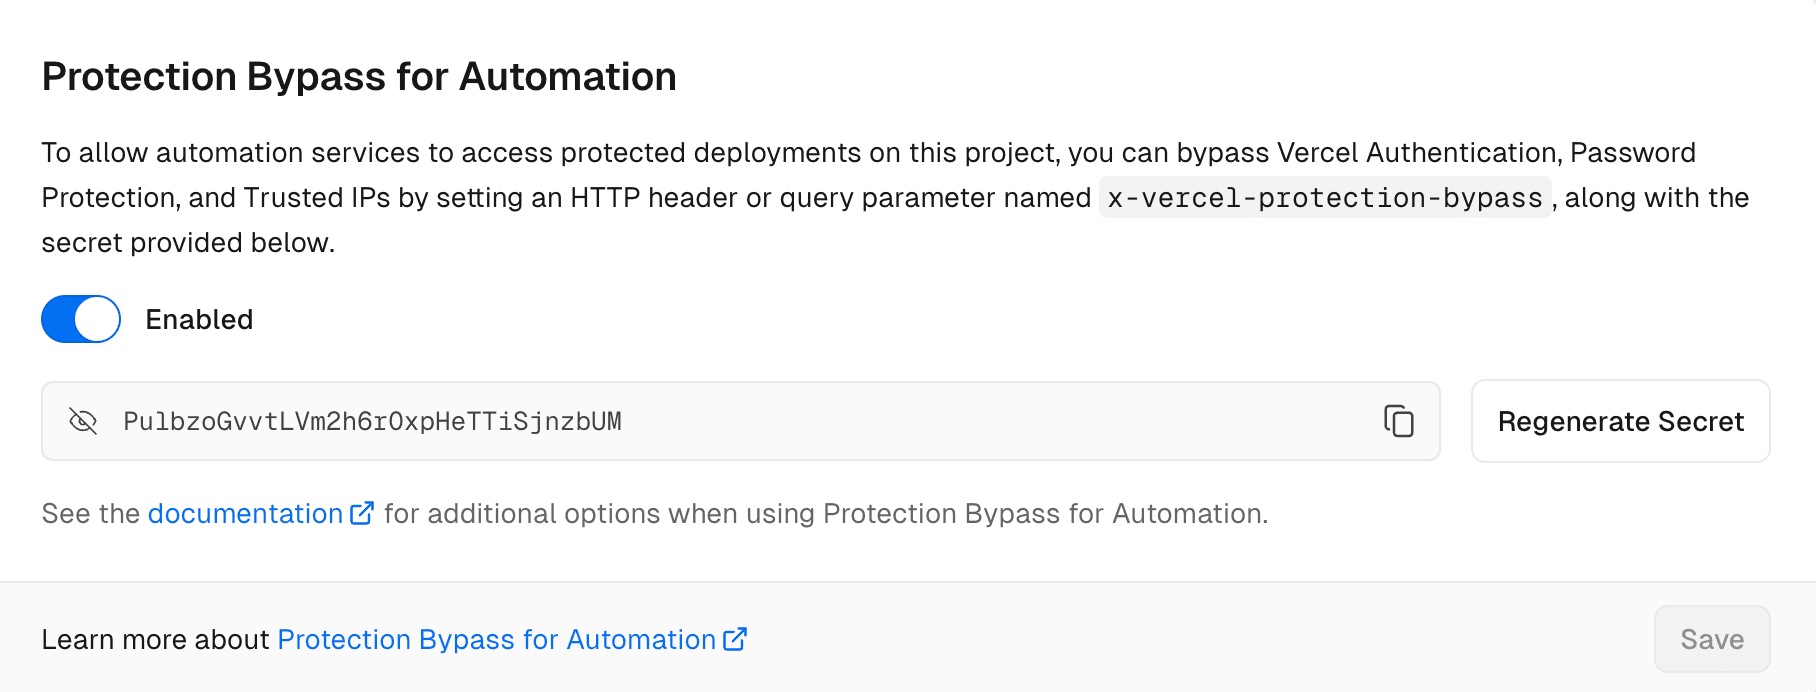 Protection Bypass for Automation option with advanced deployment protection
feature.